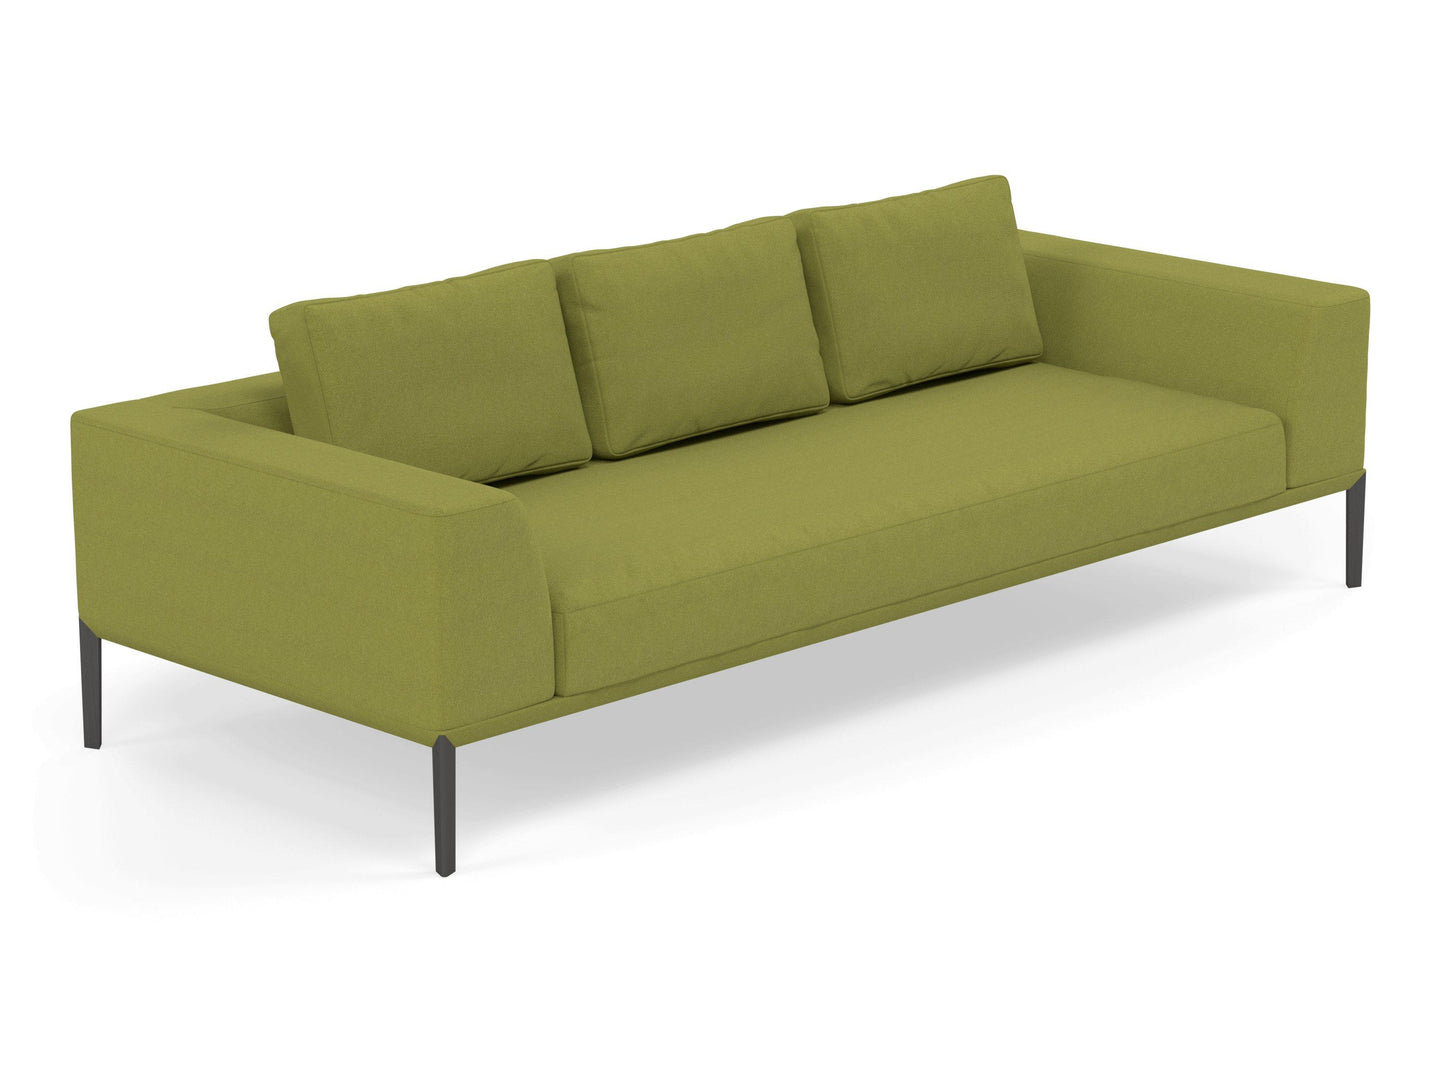 Modern 3 Seater Sofa with 2 Armrests in Lime Green Fabric-Distinct Designs (London) Ltd